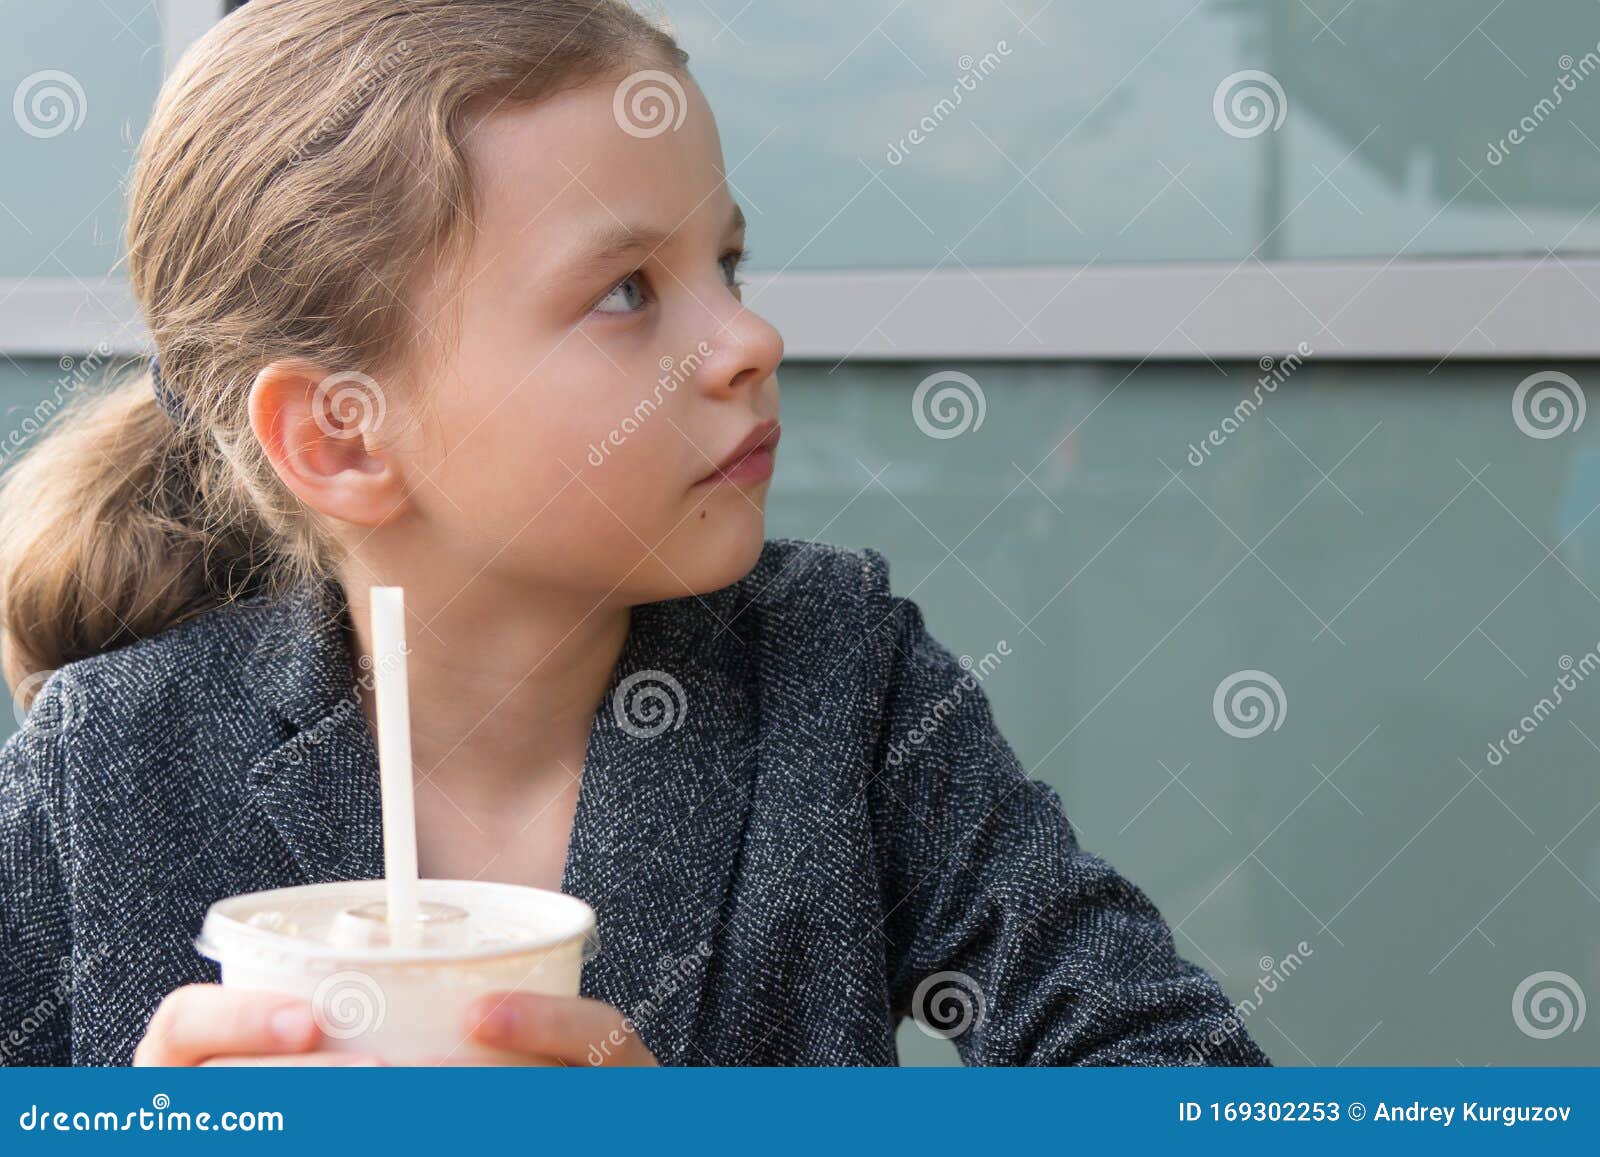 teen girl, looking at the interlocutor, portrait, holding a drink with a straw